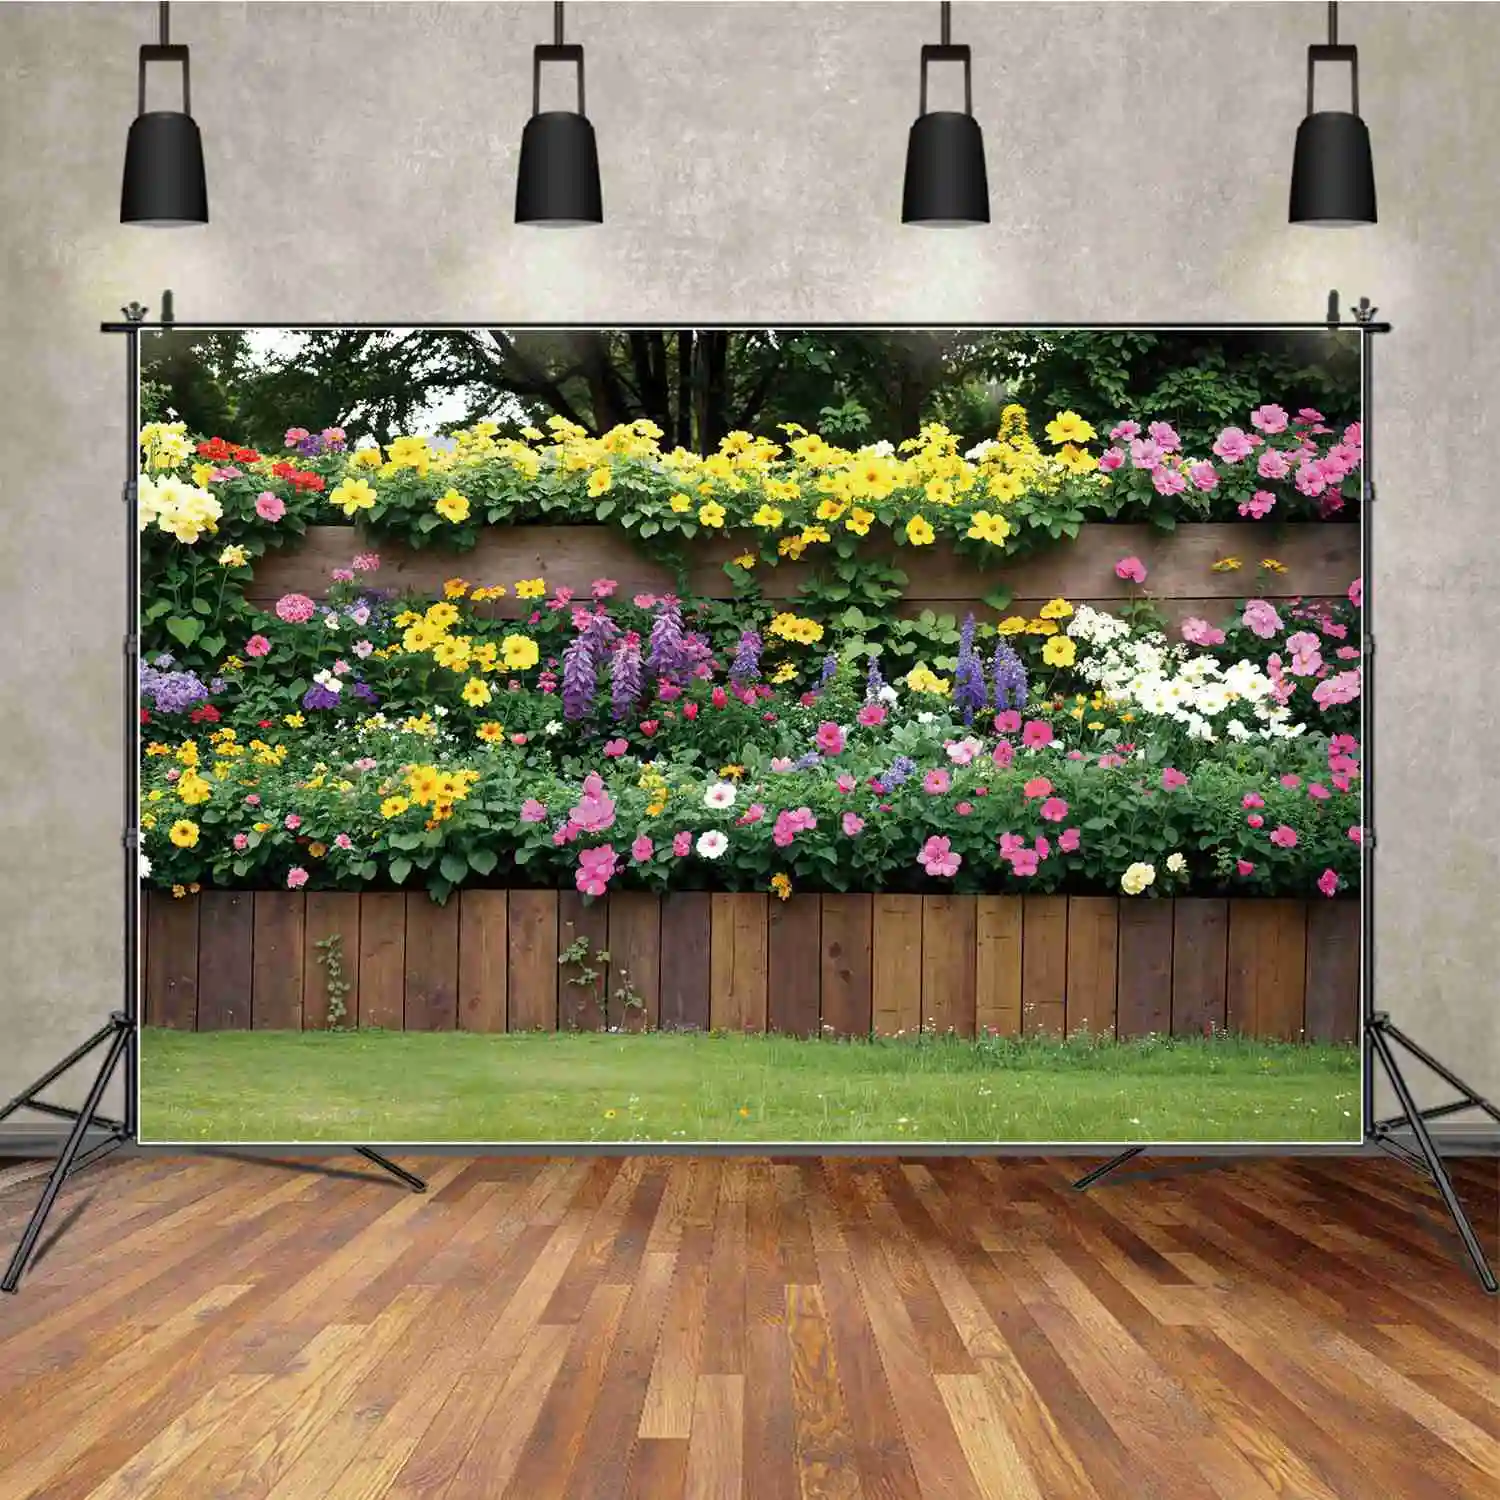 

Blossom Flower Garden Wall Photography Backdrops Decor Grassland Wooden Fence Personalized Kids Photo Backgrounds Studio Props